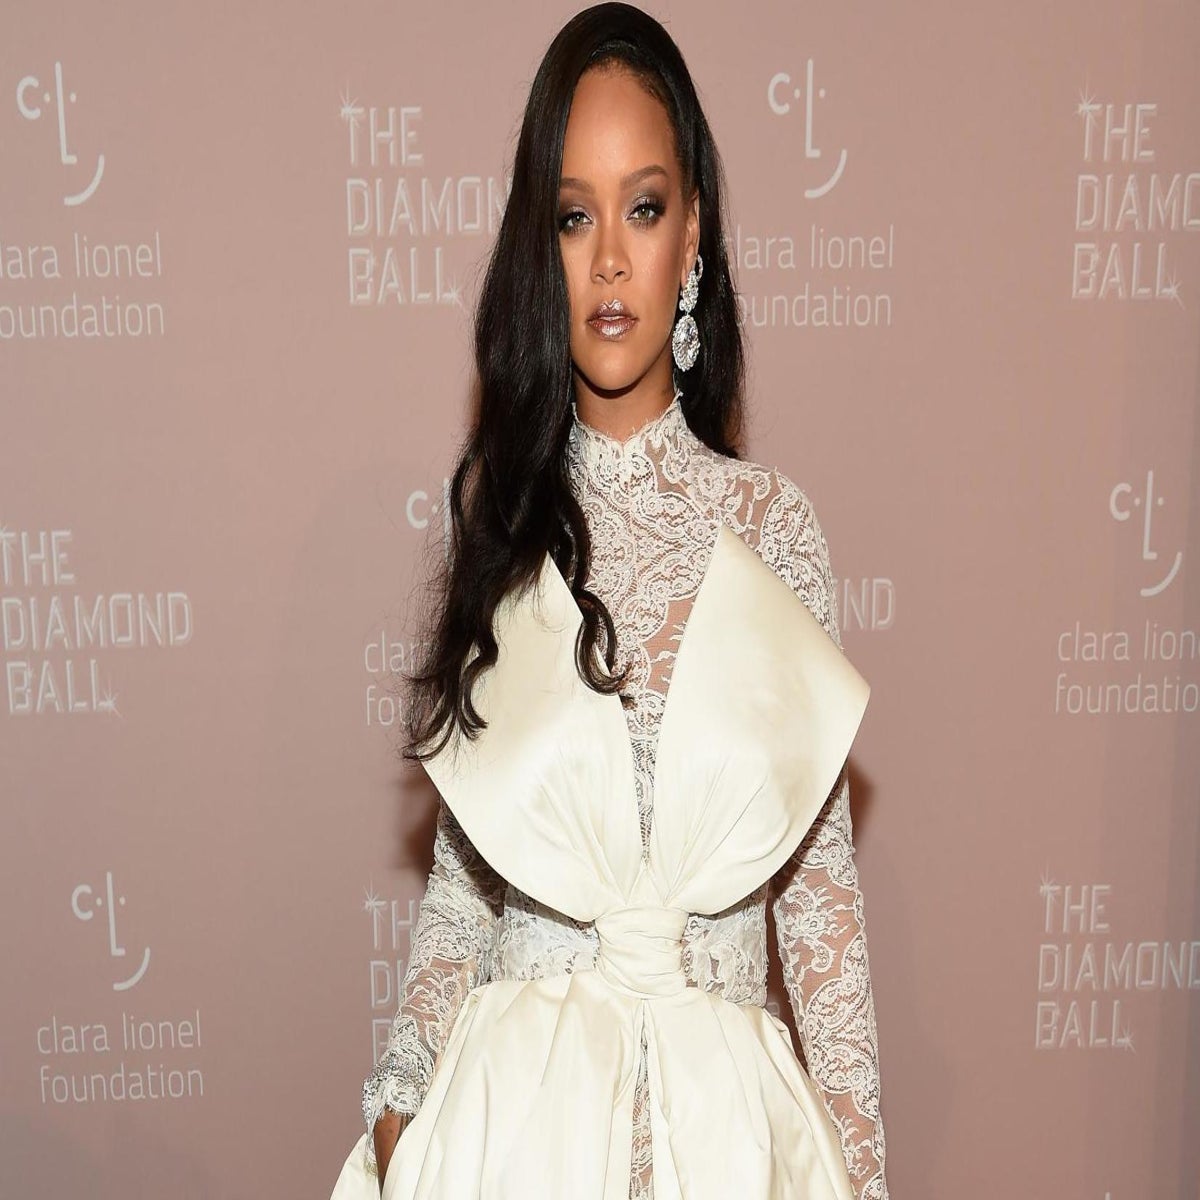 Fenty fashion faltered, but LVMH sees growth for lingerie and